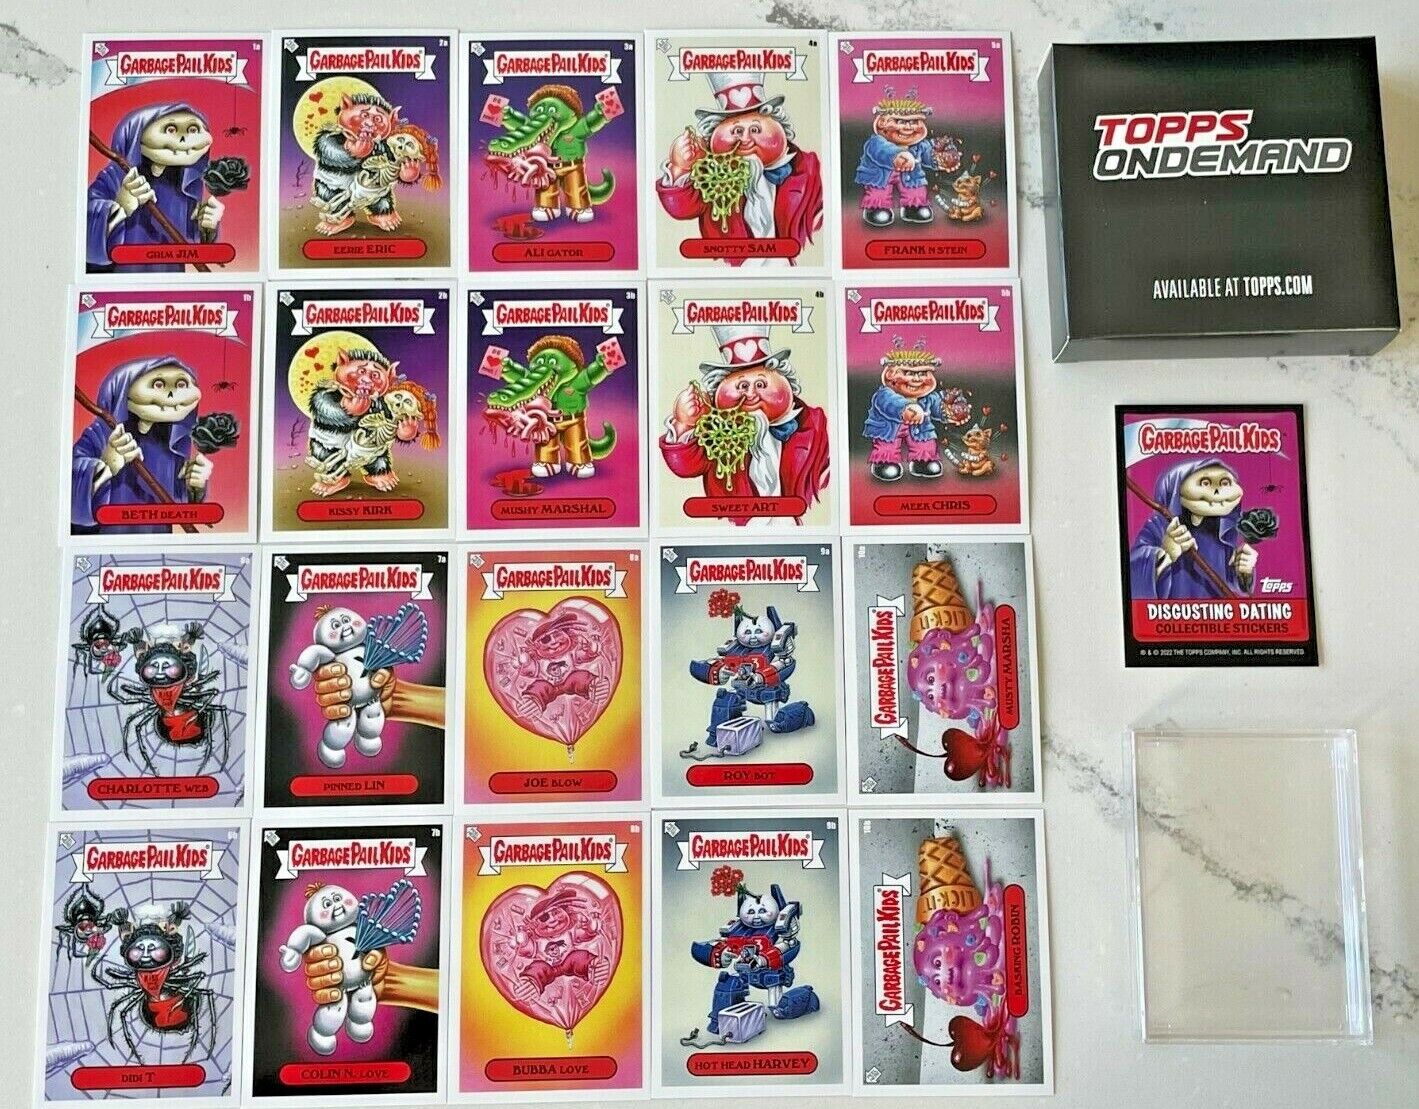 NEW Topps On-Demand 2022 Garbage Pail Kids DISGUSTING DATING 21-Card Sticker SET